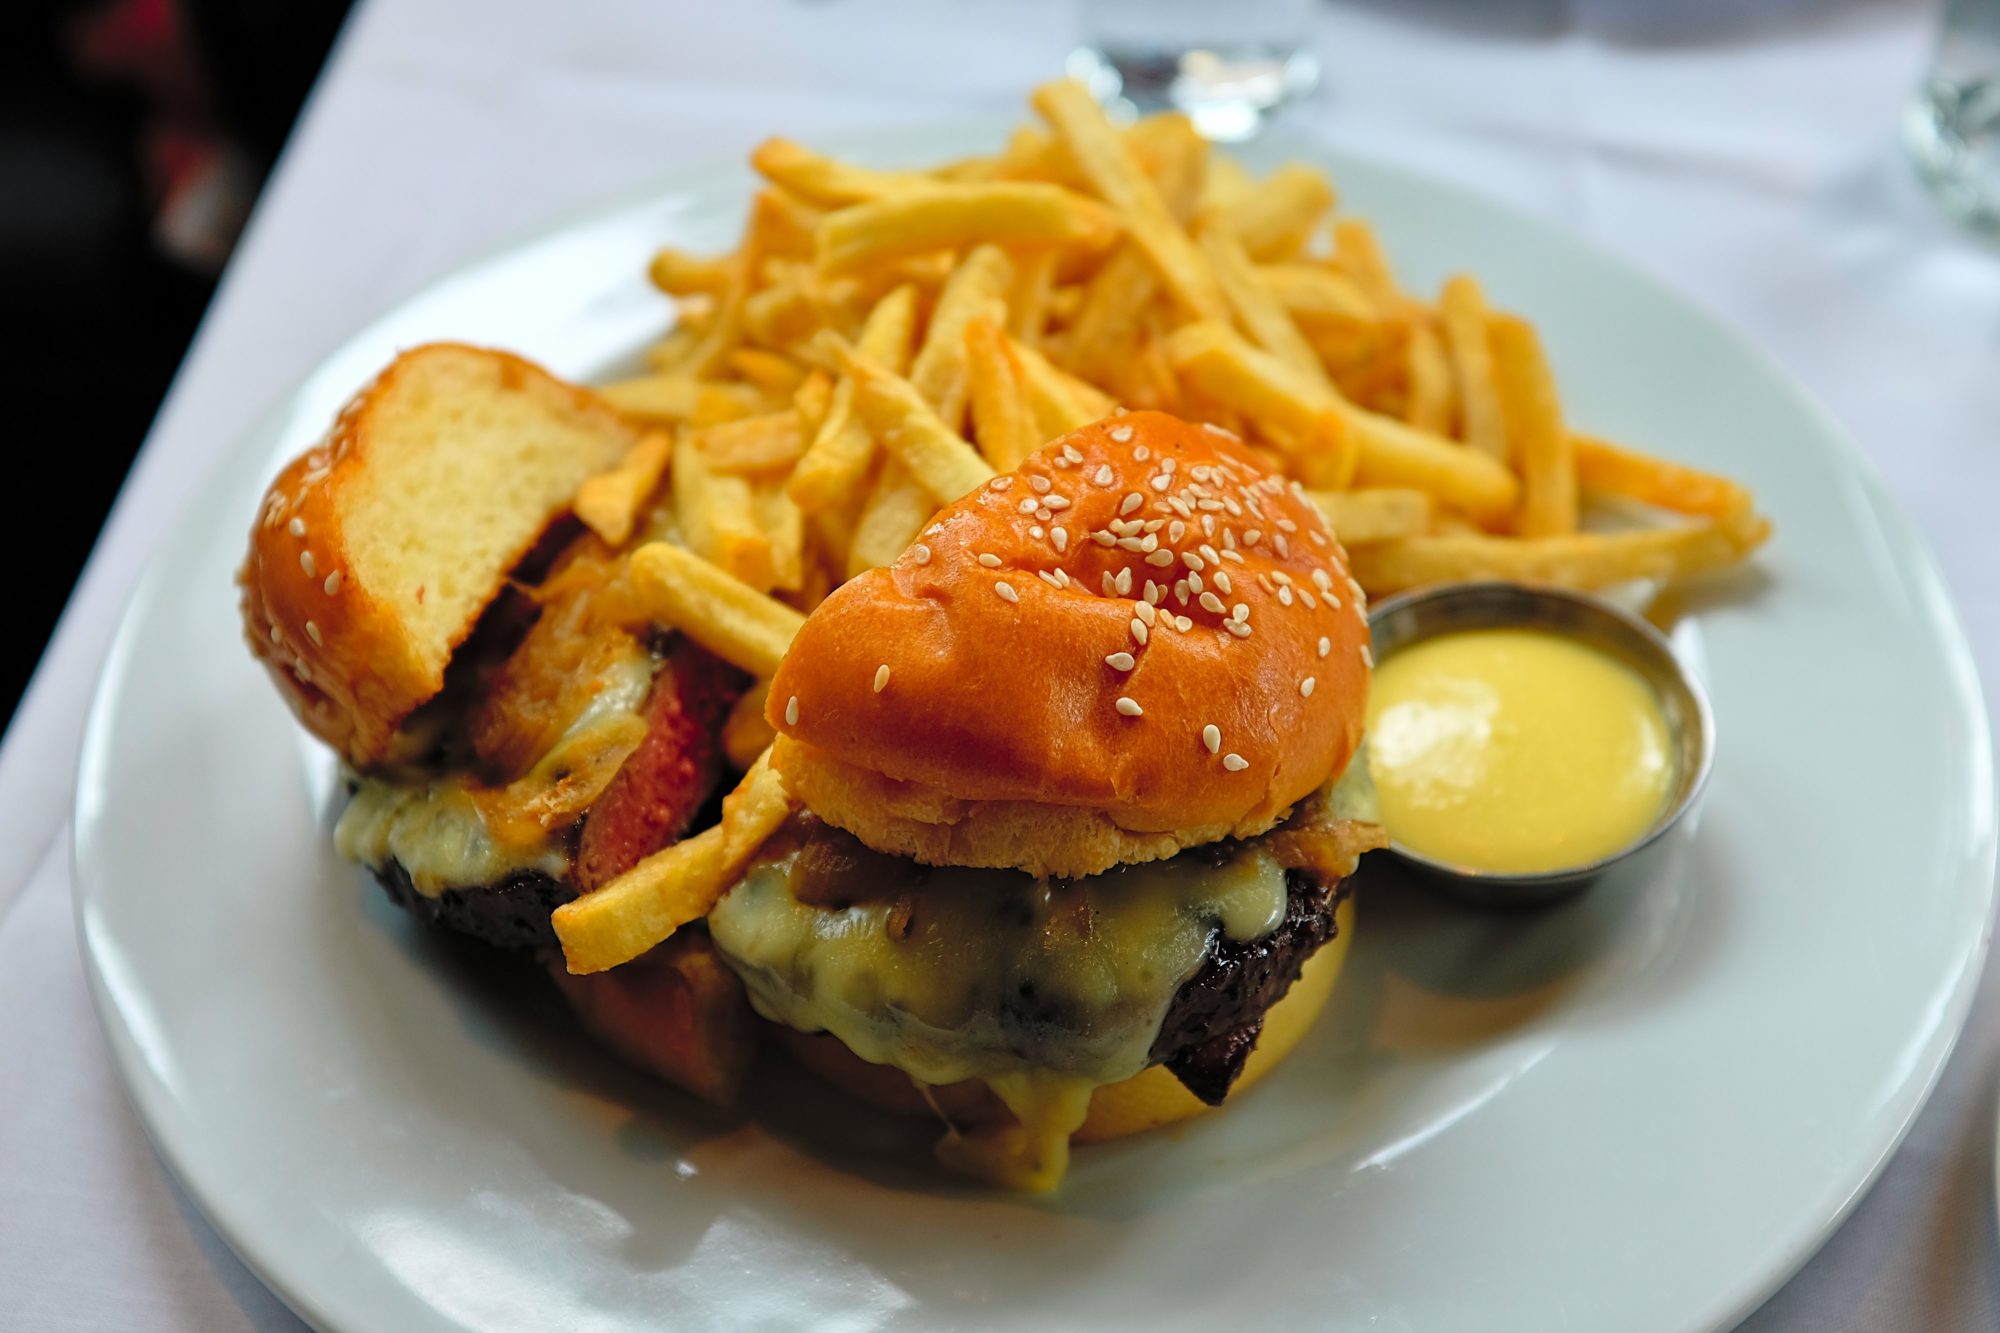 A burger is sliced in two and served with an abundance of fries